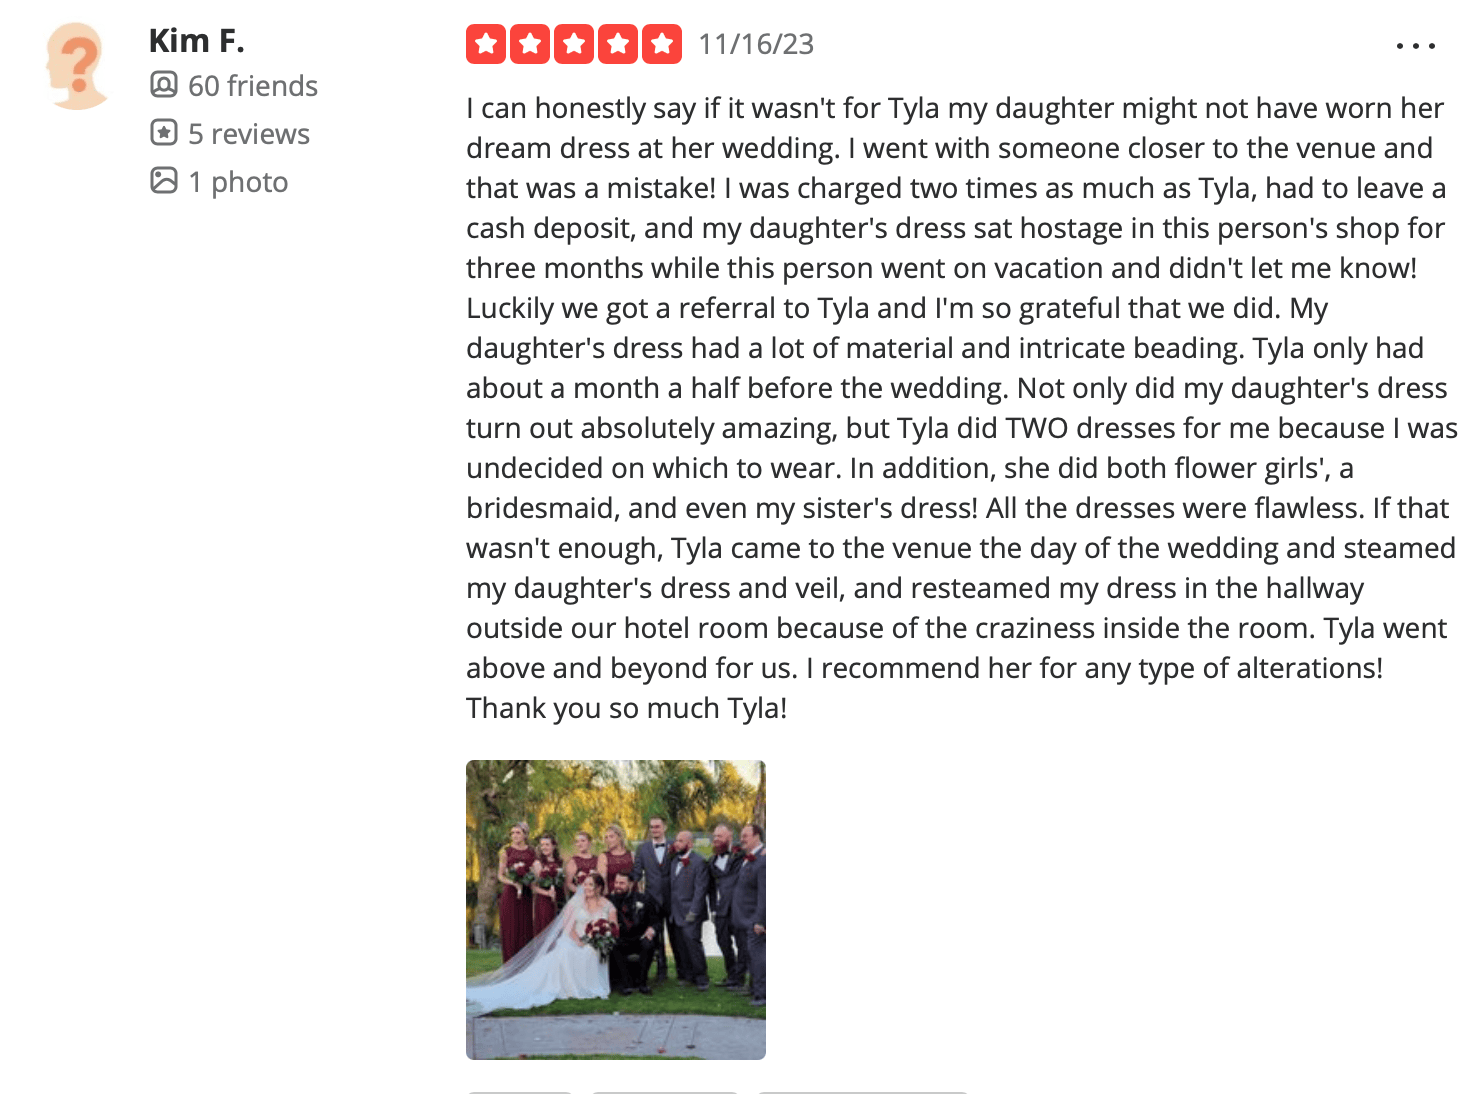 Tyla's Bridal Shop's 5 star review with pictures from the bride